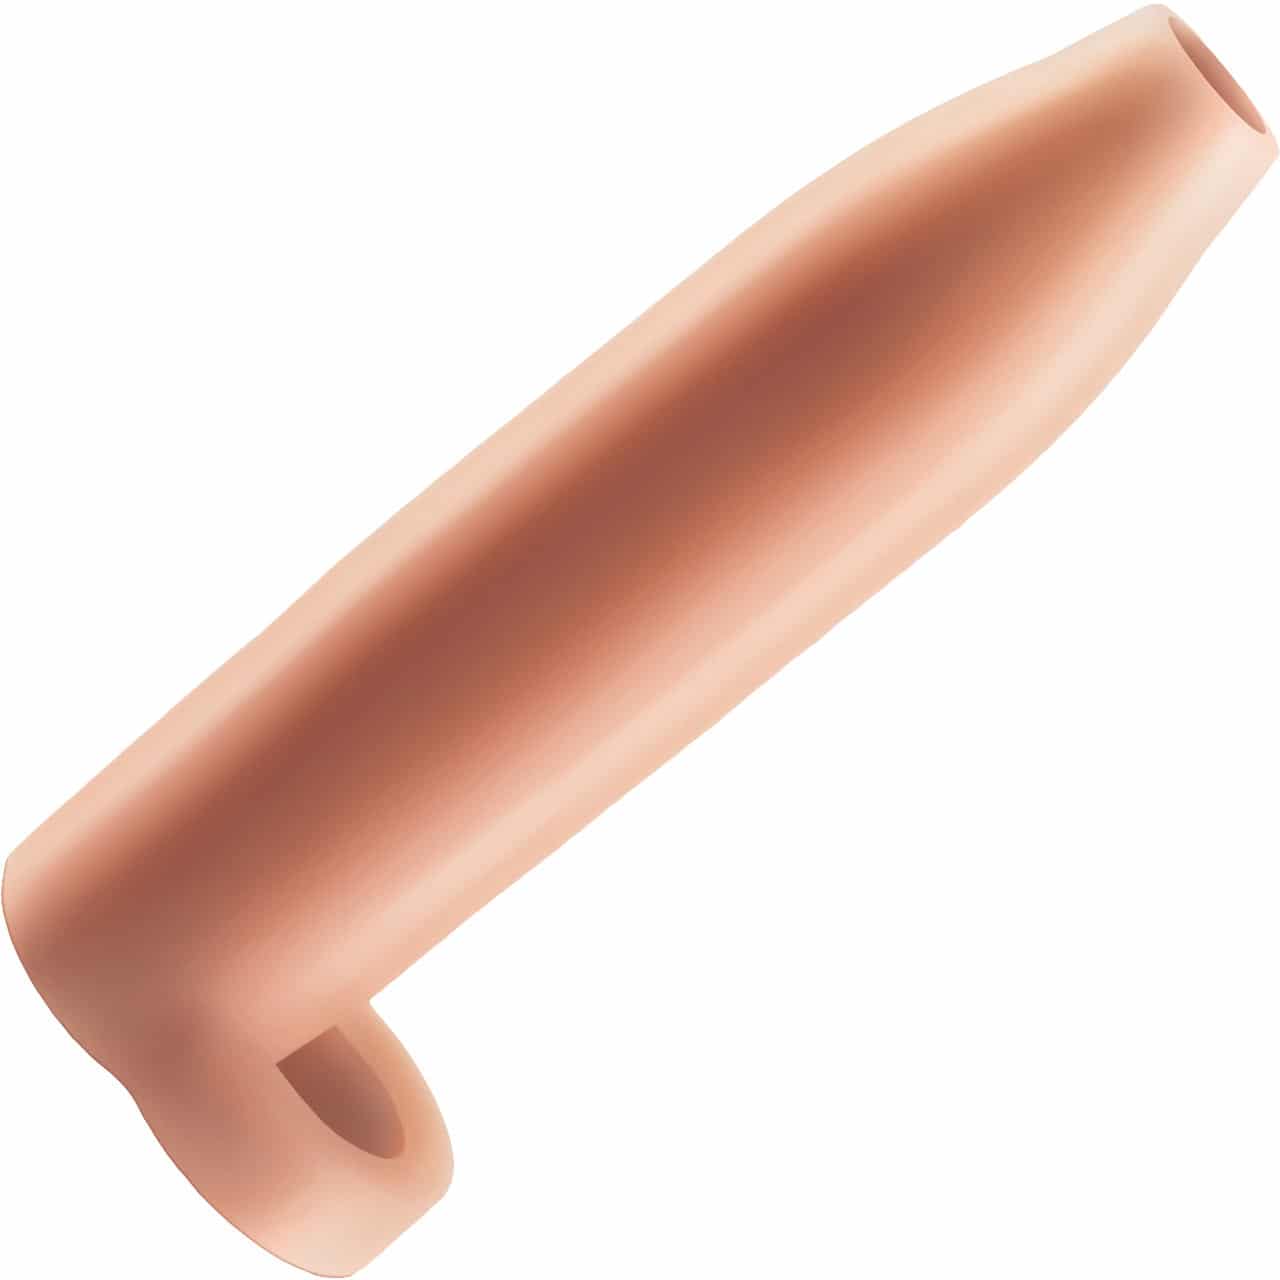 Compare Real Feel Penis Enhancer